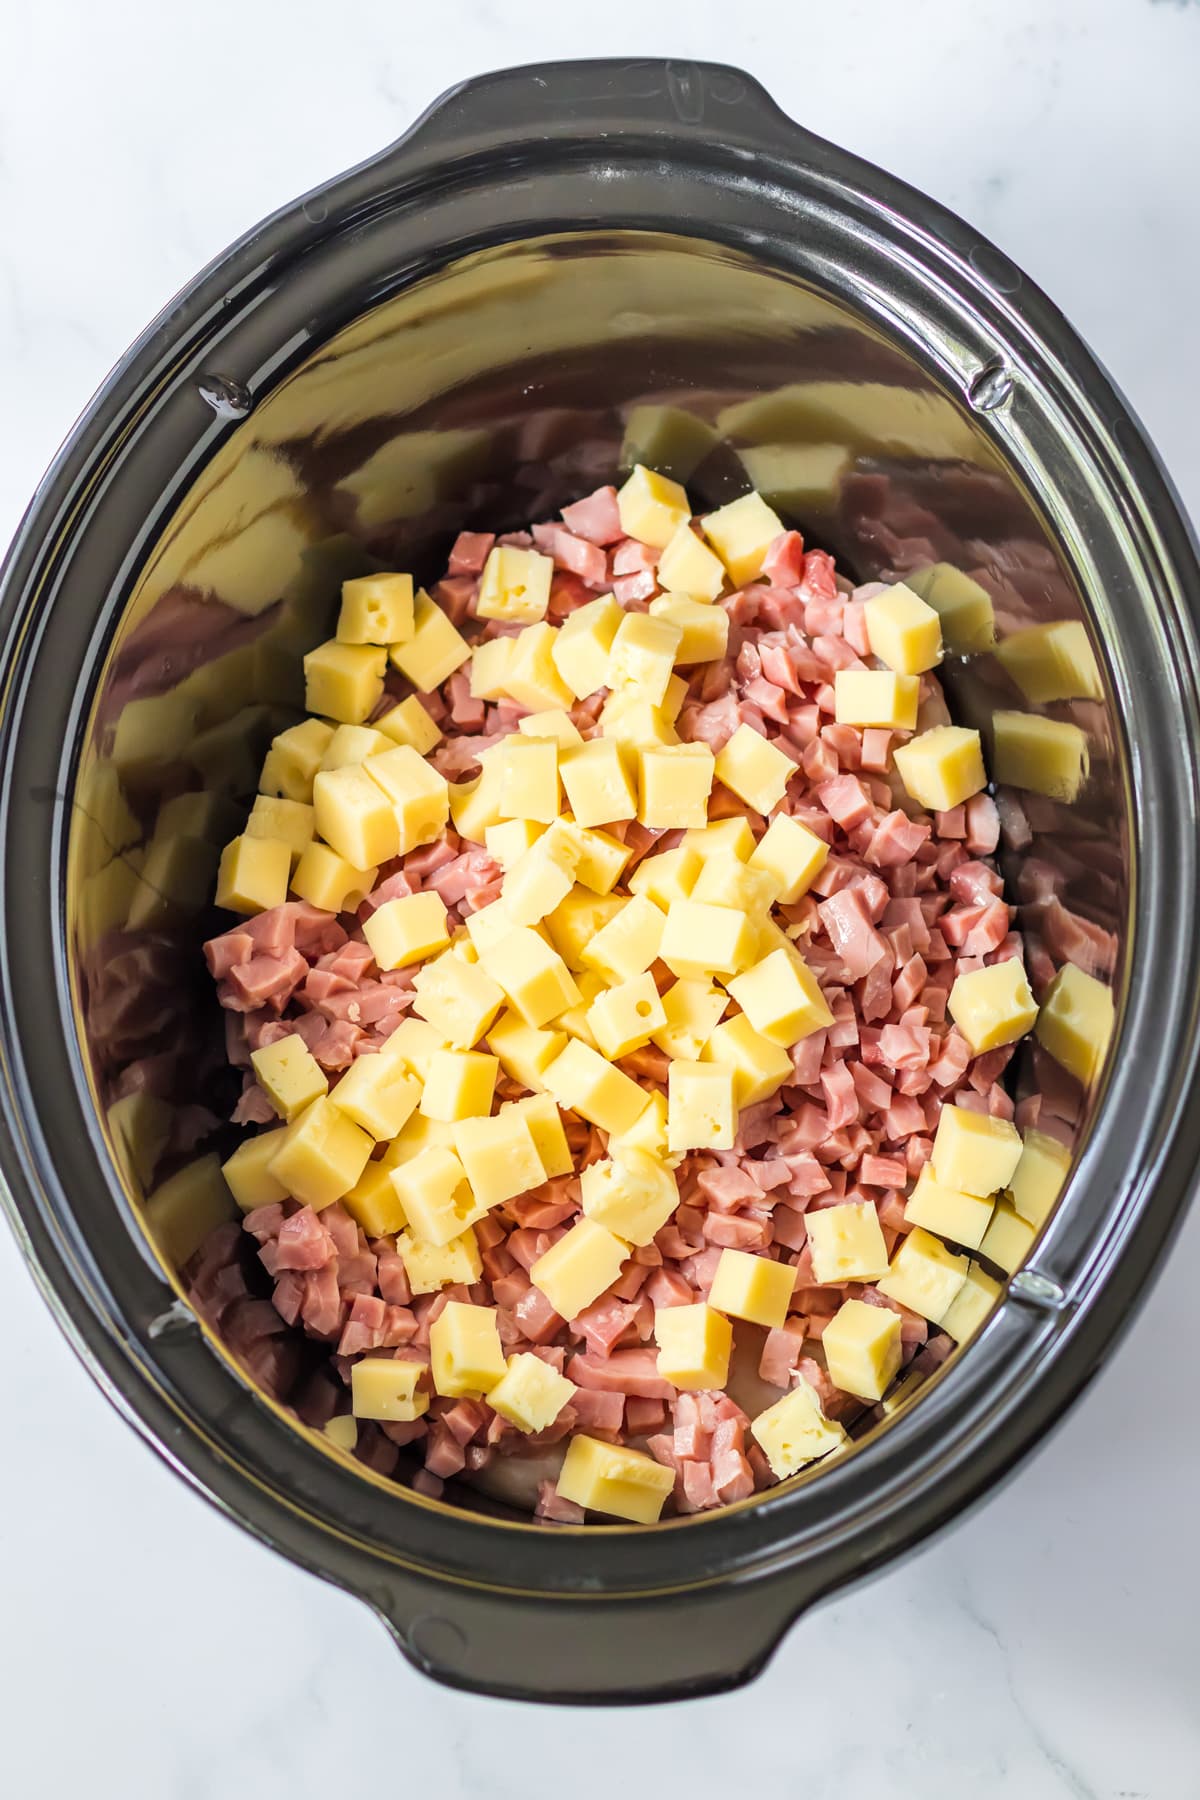 Adding ham and cheese in a slow cooker is a step in preparing Slow Cooker Chicken Cordon Bleu